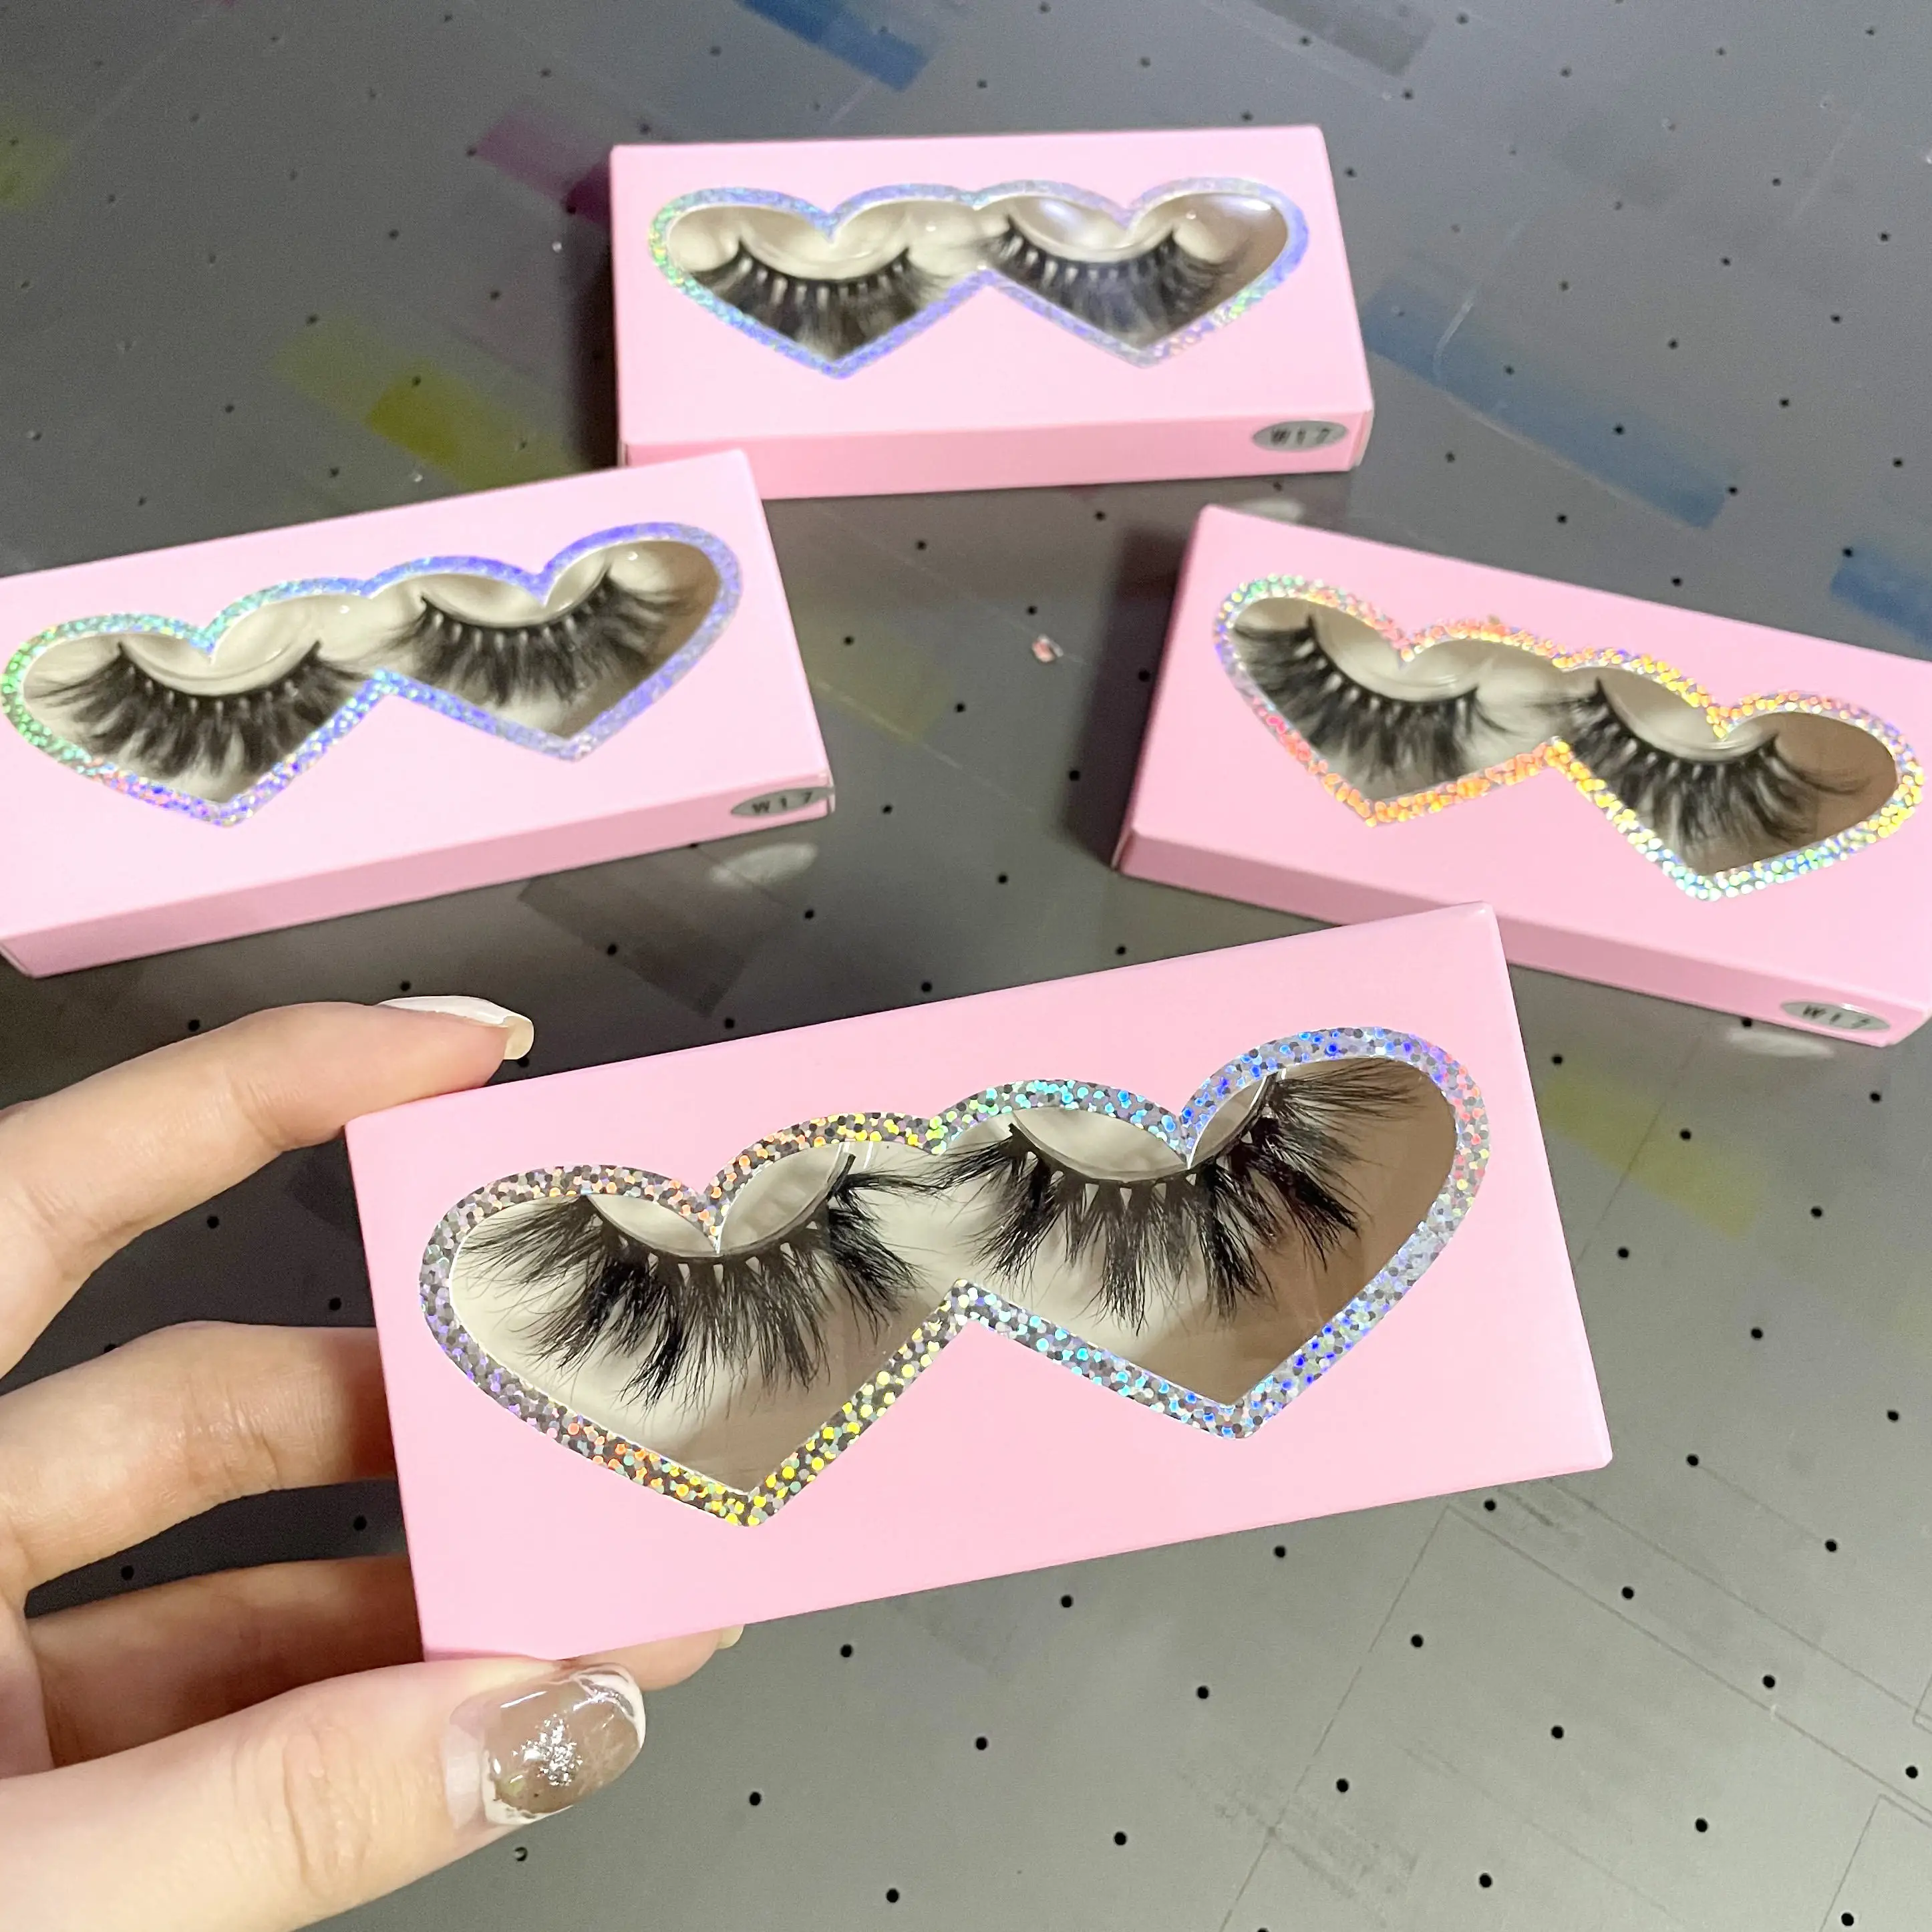 

Customized pink heart shaped lash box packaging valentine gifts 2021 new arrivals 25mm 3d mink eyelashes vendors, Natural black